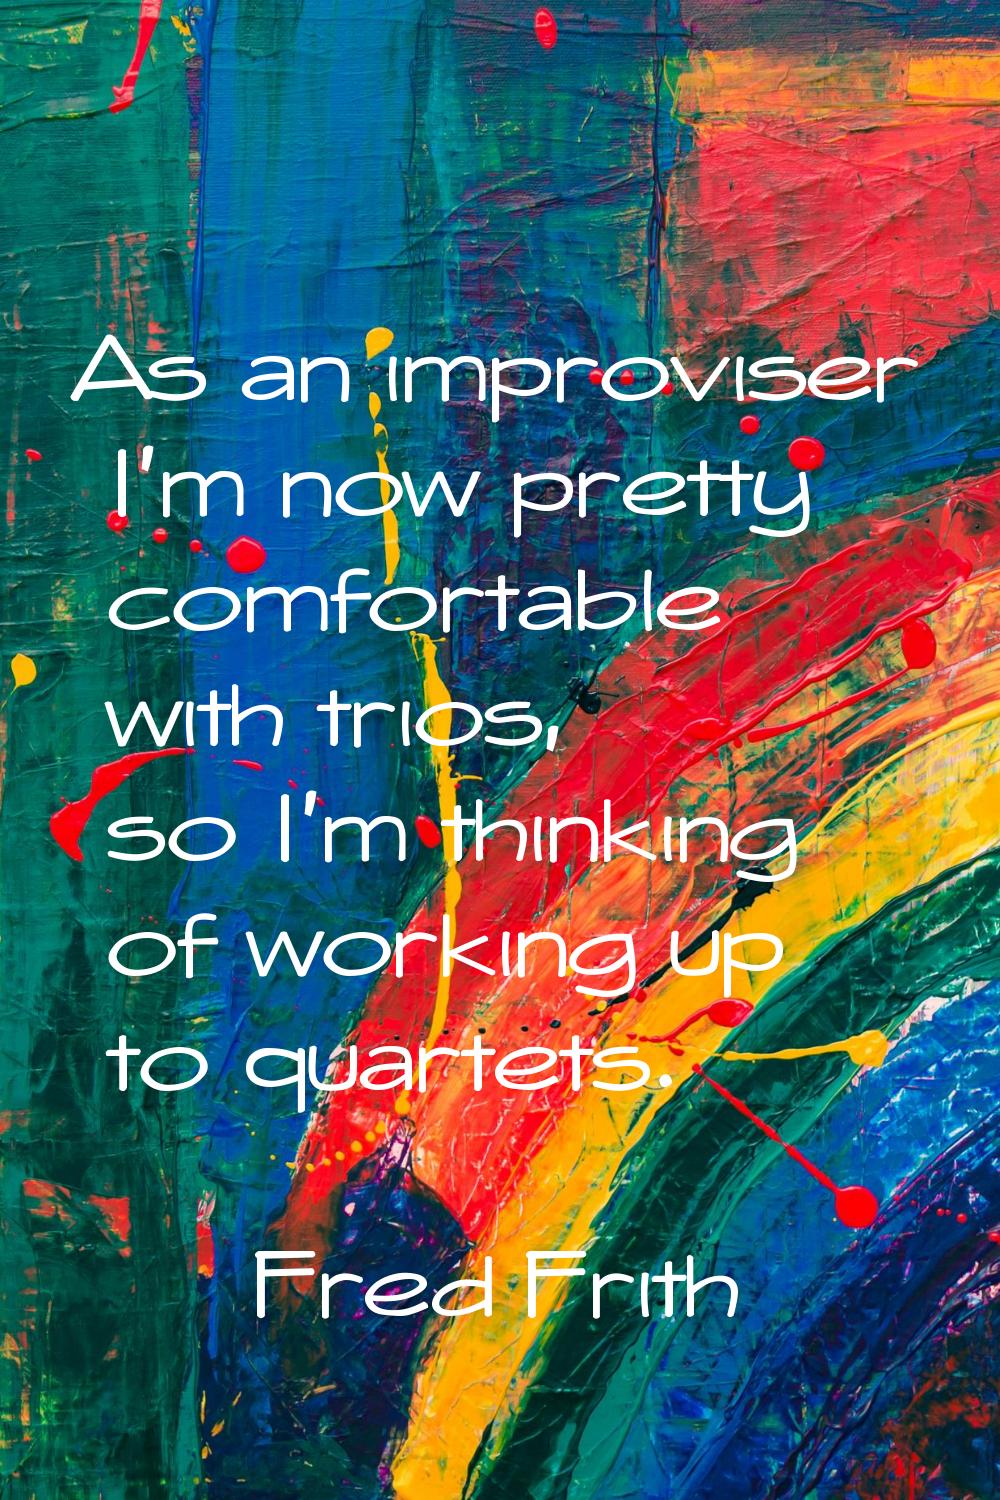 As an improviser I'm now pretty comfortable with trios, so I'm thinking of working up to quartets.